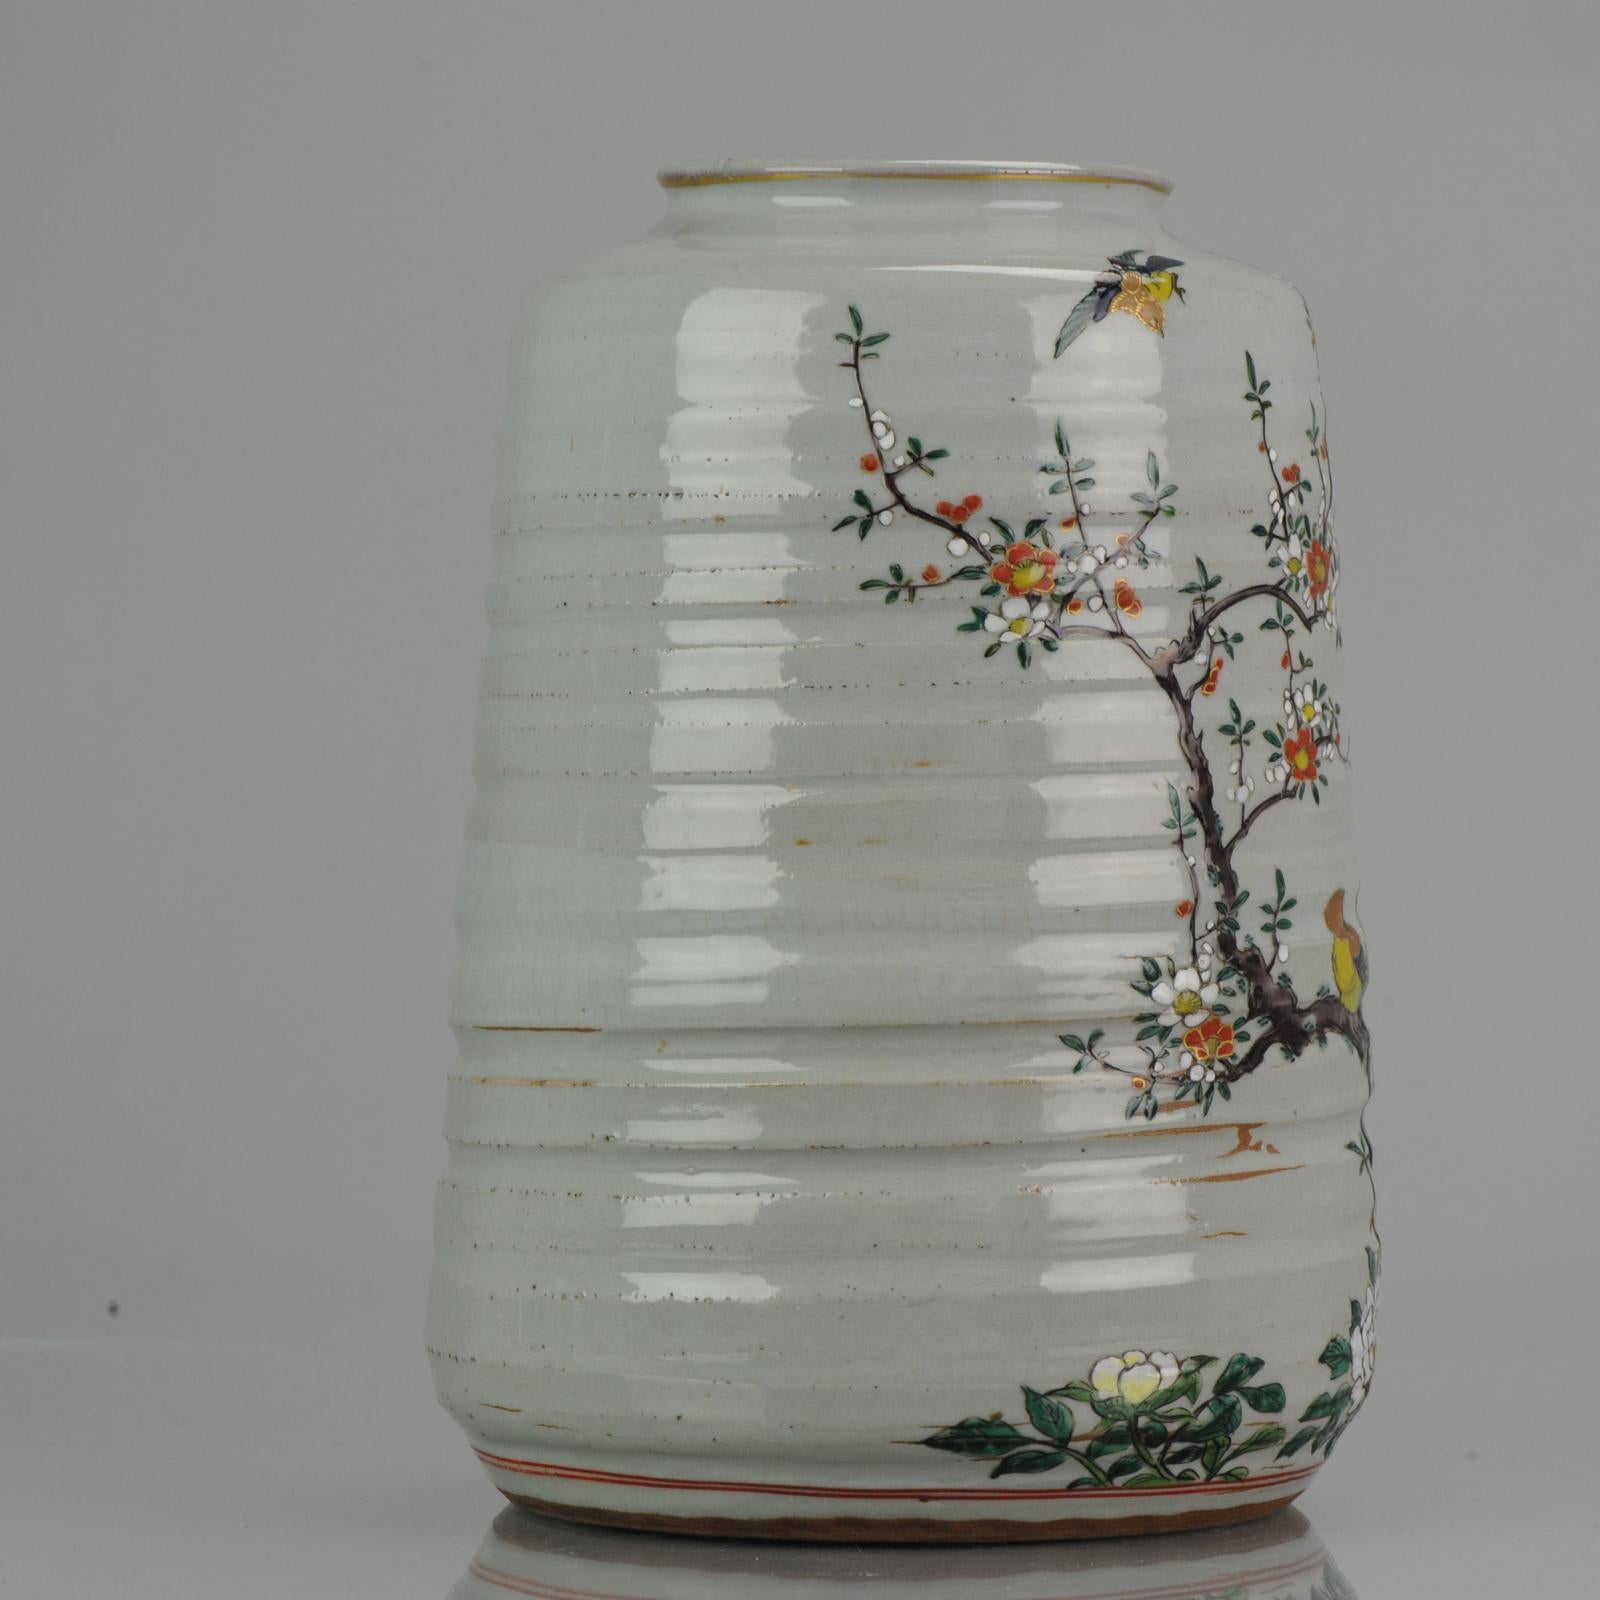 Antique Kutani Japanese Floral Vase Marked Plate Japan Top Quality In Good Condition For Sale In Amsterdam, Noord Holland